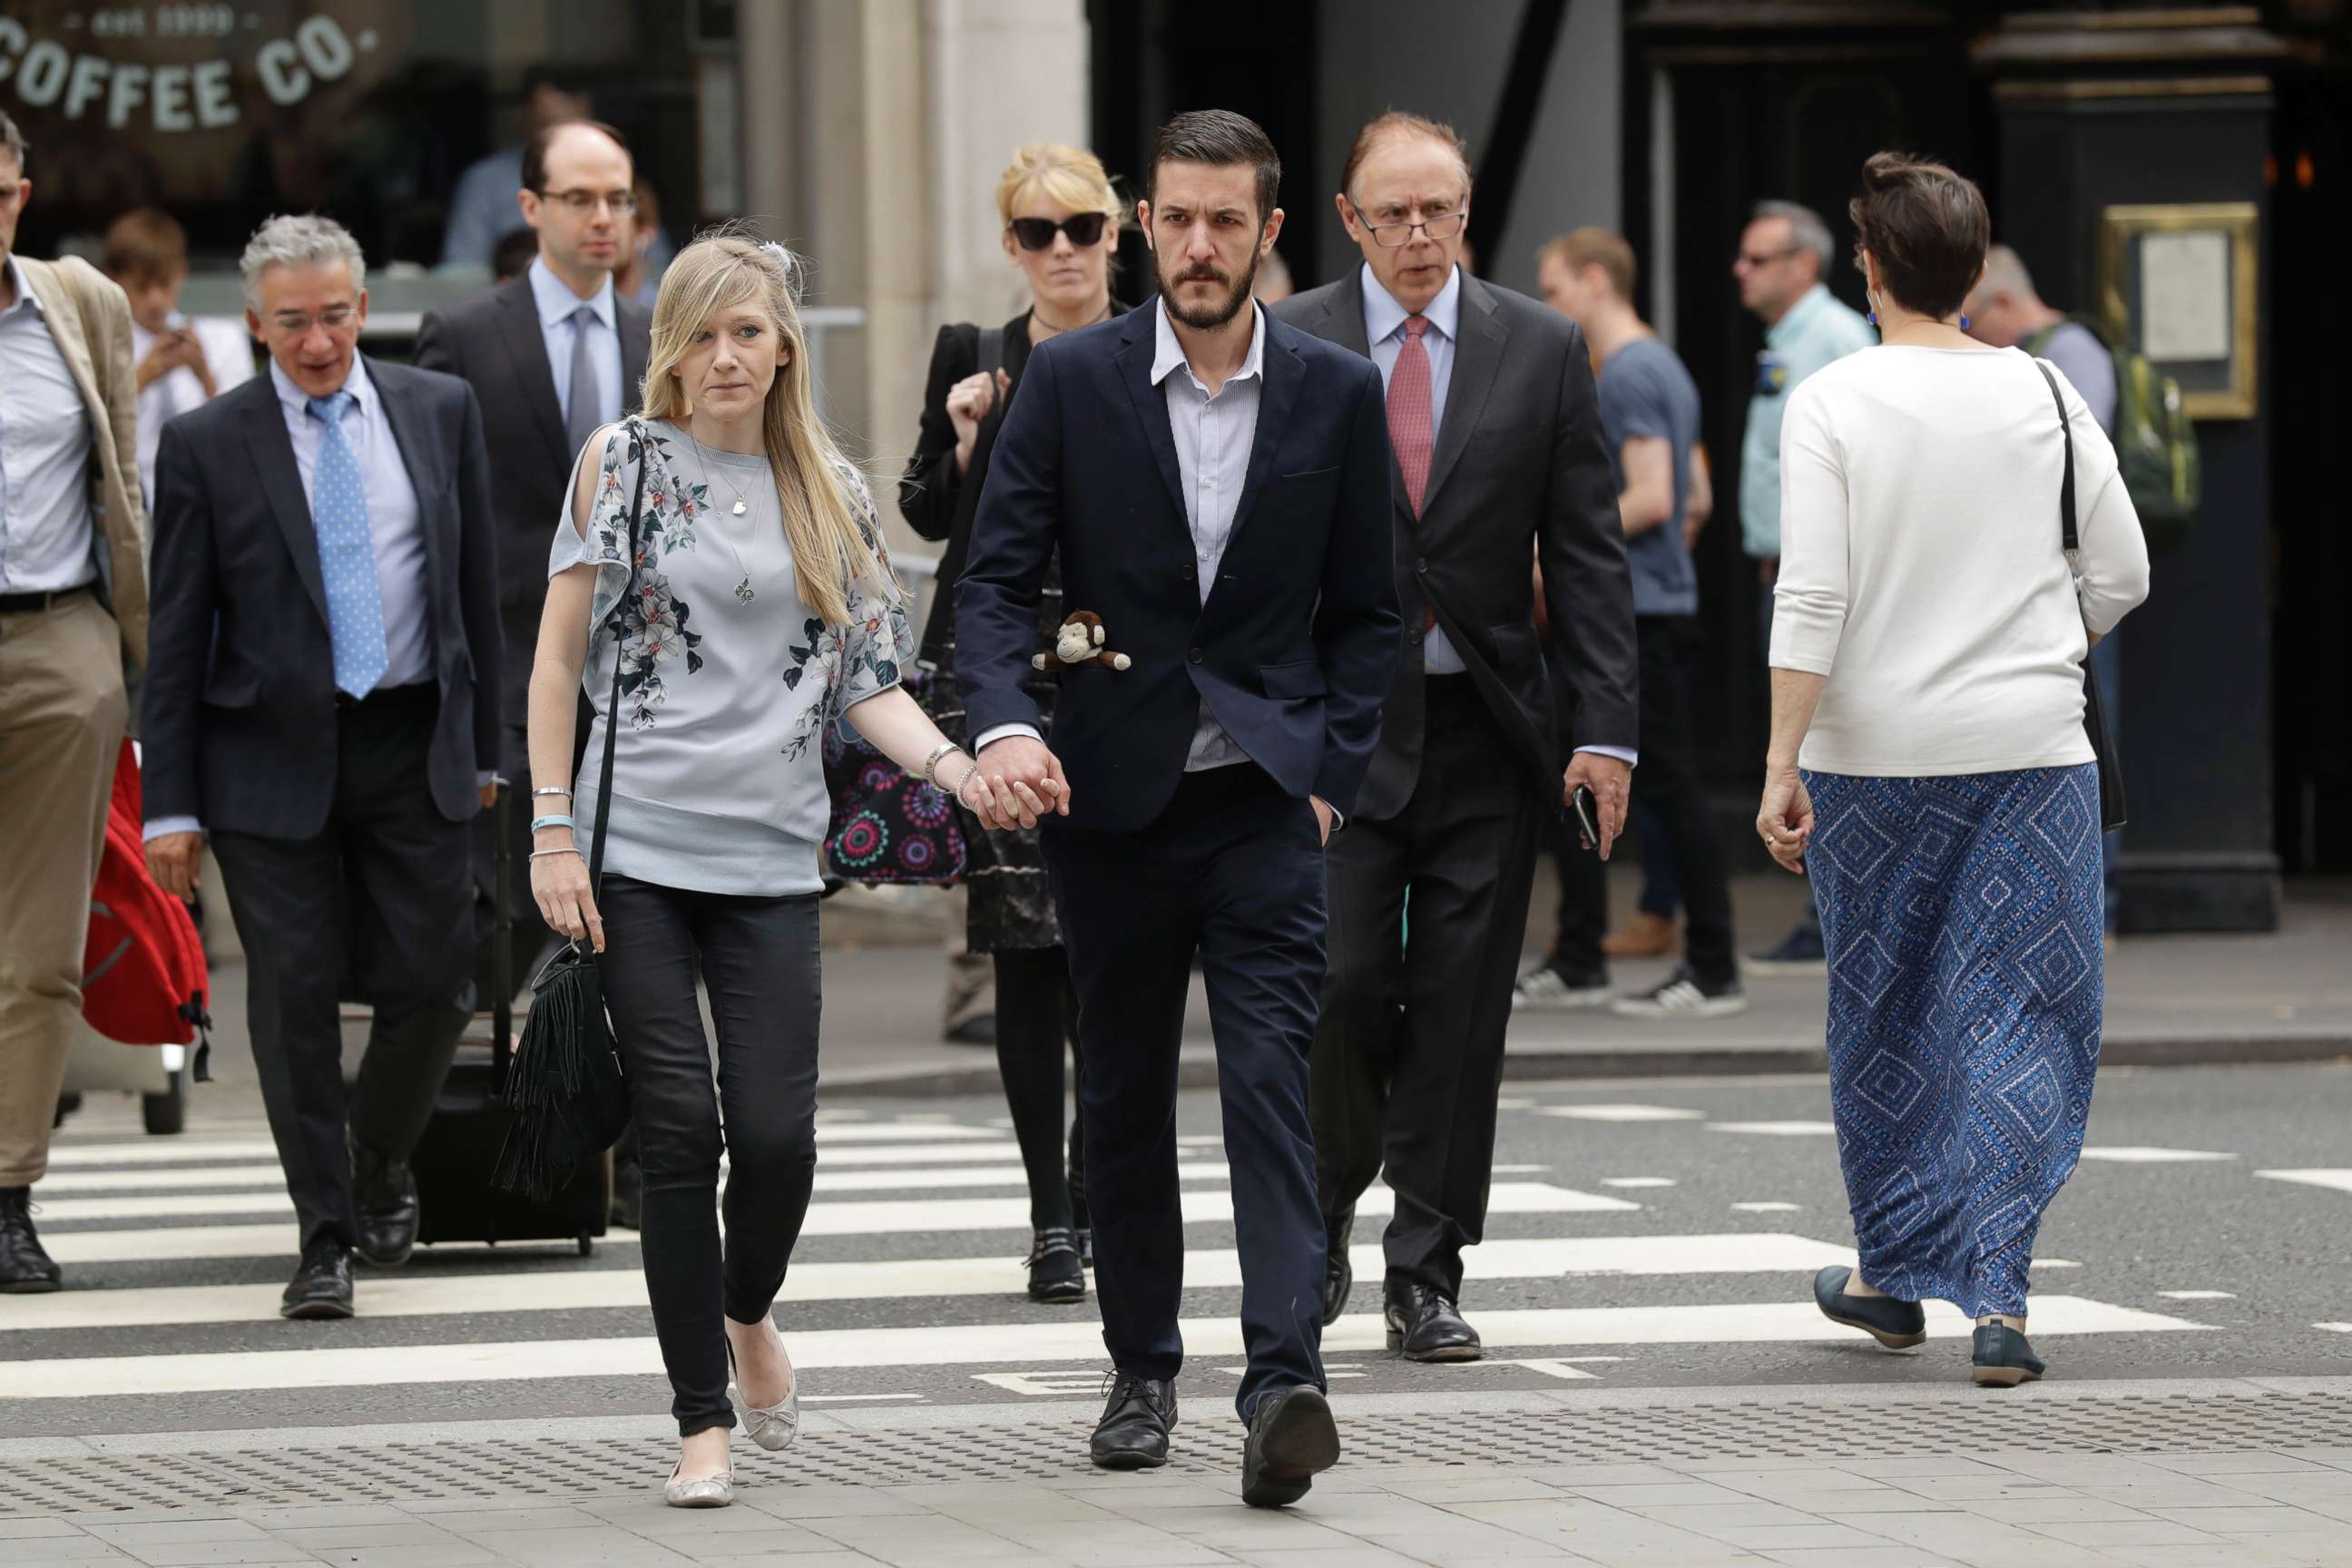 PHOTO: The parents of critically ill baby Charlie Gard, Connie Yates and Chris Gard, arrive at the High Court in London, July 14, 2017.